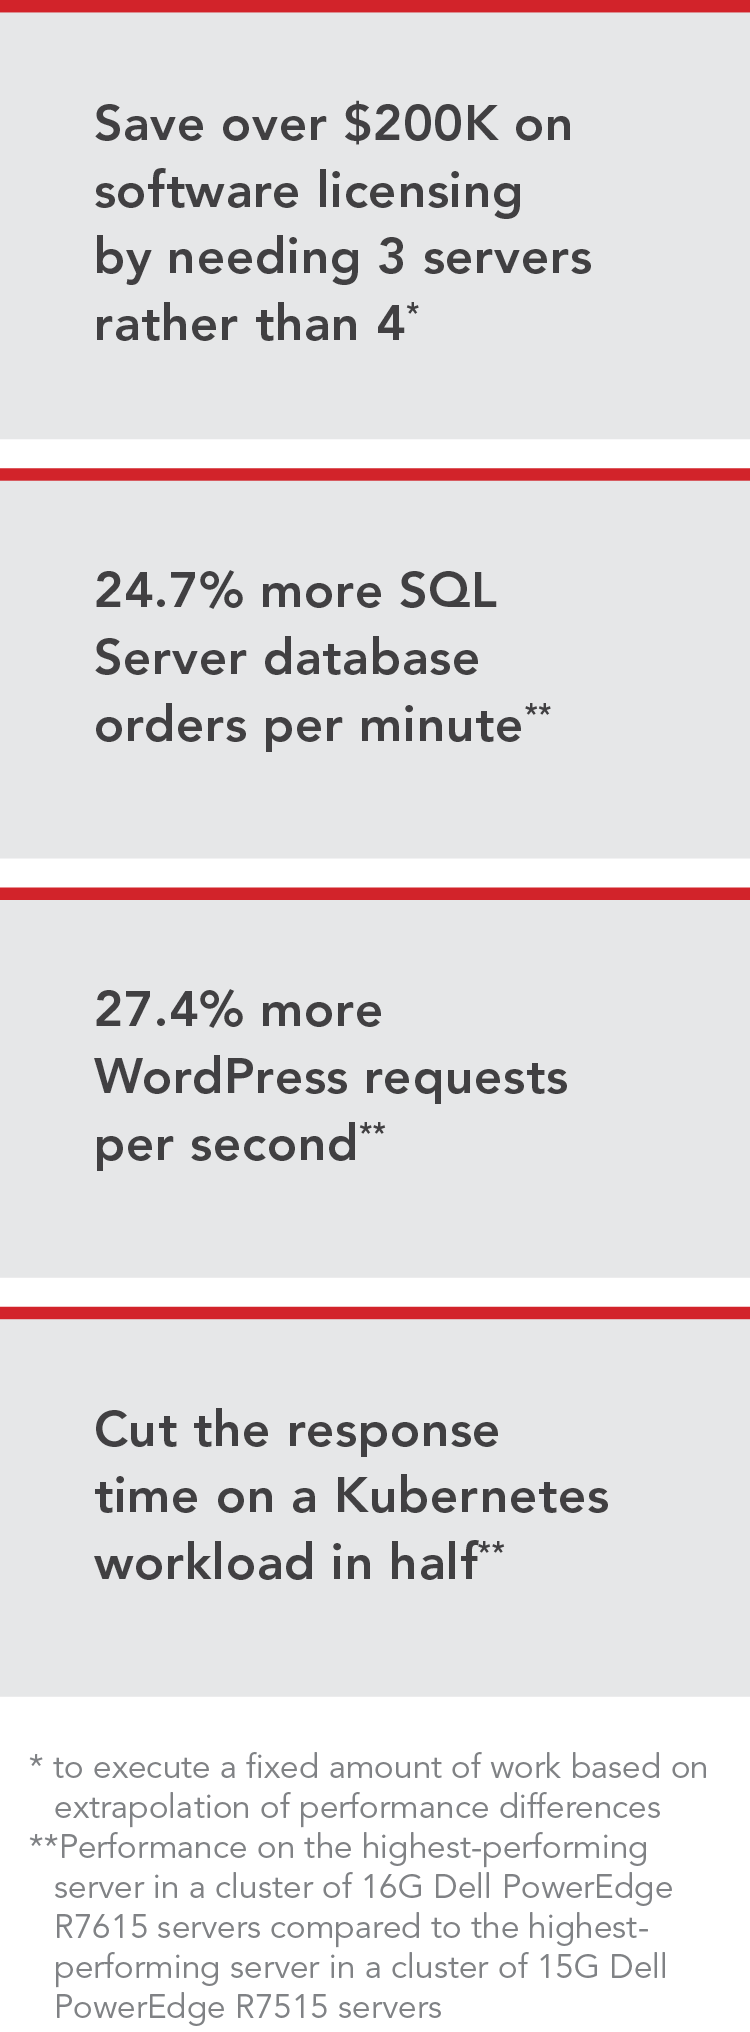 Save over $200K on software licensing by needing 3 servers rather than 4 to execute a fixed amount of work based on extrapolation of performance differences; 24.7% more SQL Server database orders per minute (Performance on the highest-performing server in a cluster of 16G Dell PowerEdge R7615 servers compared to the highest-performing server in a cluster of 15G Dell PowerEdge R7515 servers); 27.4% more WordPress requests per second (Performance on the highest-performing server in a cluster of 16G Dell PowerEdge R7615 servers compared to the highest-performing server in a cluster of 15G Dell PowerEdge R7515 servers); Cut the response time on a Kubernetes workload in half (Performance on the highest-performing server in a cluster of 16G Dell PowerEdge R7615 servers compared to the highest-performing server in a cluster of 15G Dell PowerEdge R7515 servers)